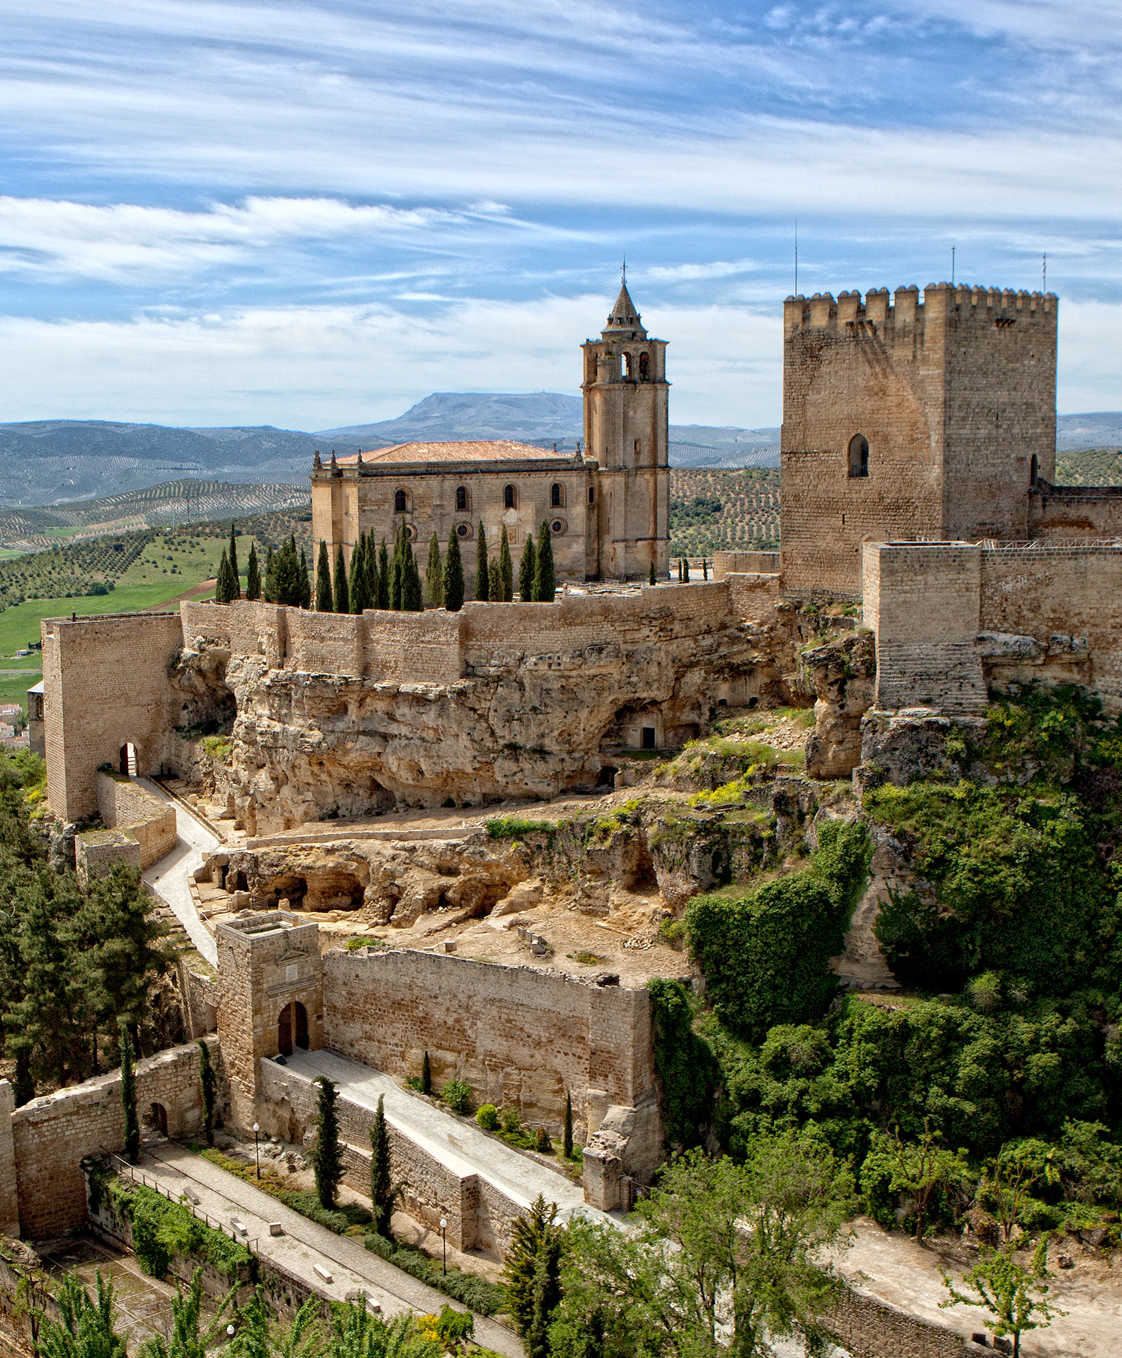 A visit to the Fortress of La Mota - admission to the monument with an audio-guide